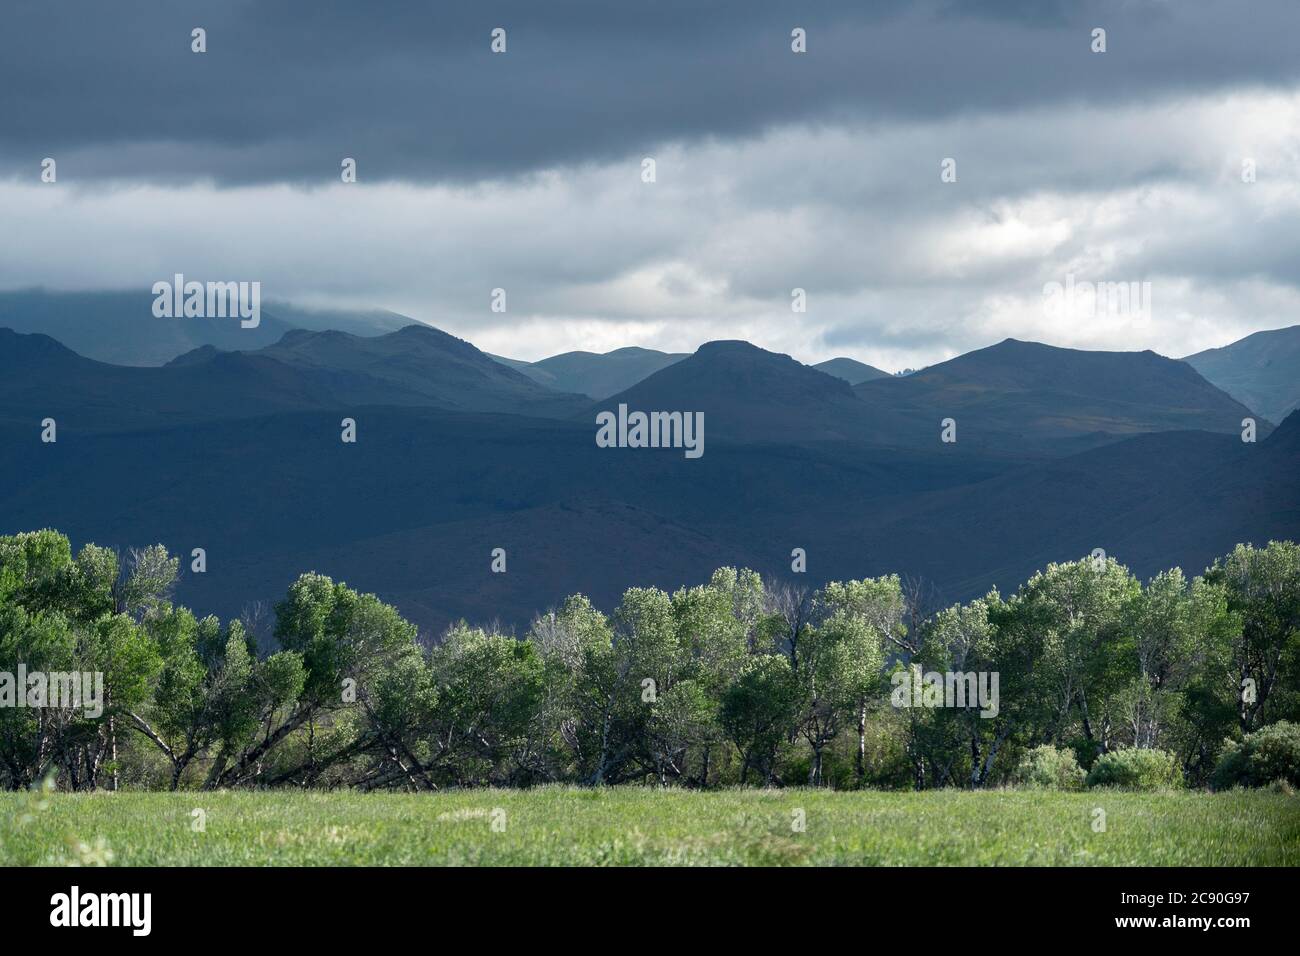 USA, Idaho, Sun Valley, Line of trees with mountains in background Stock Photo